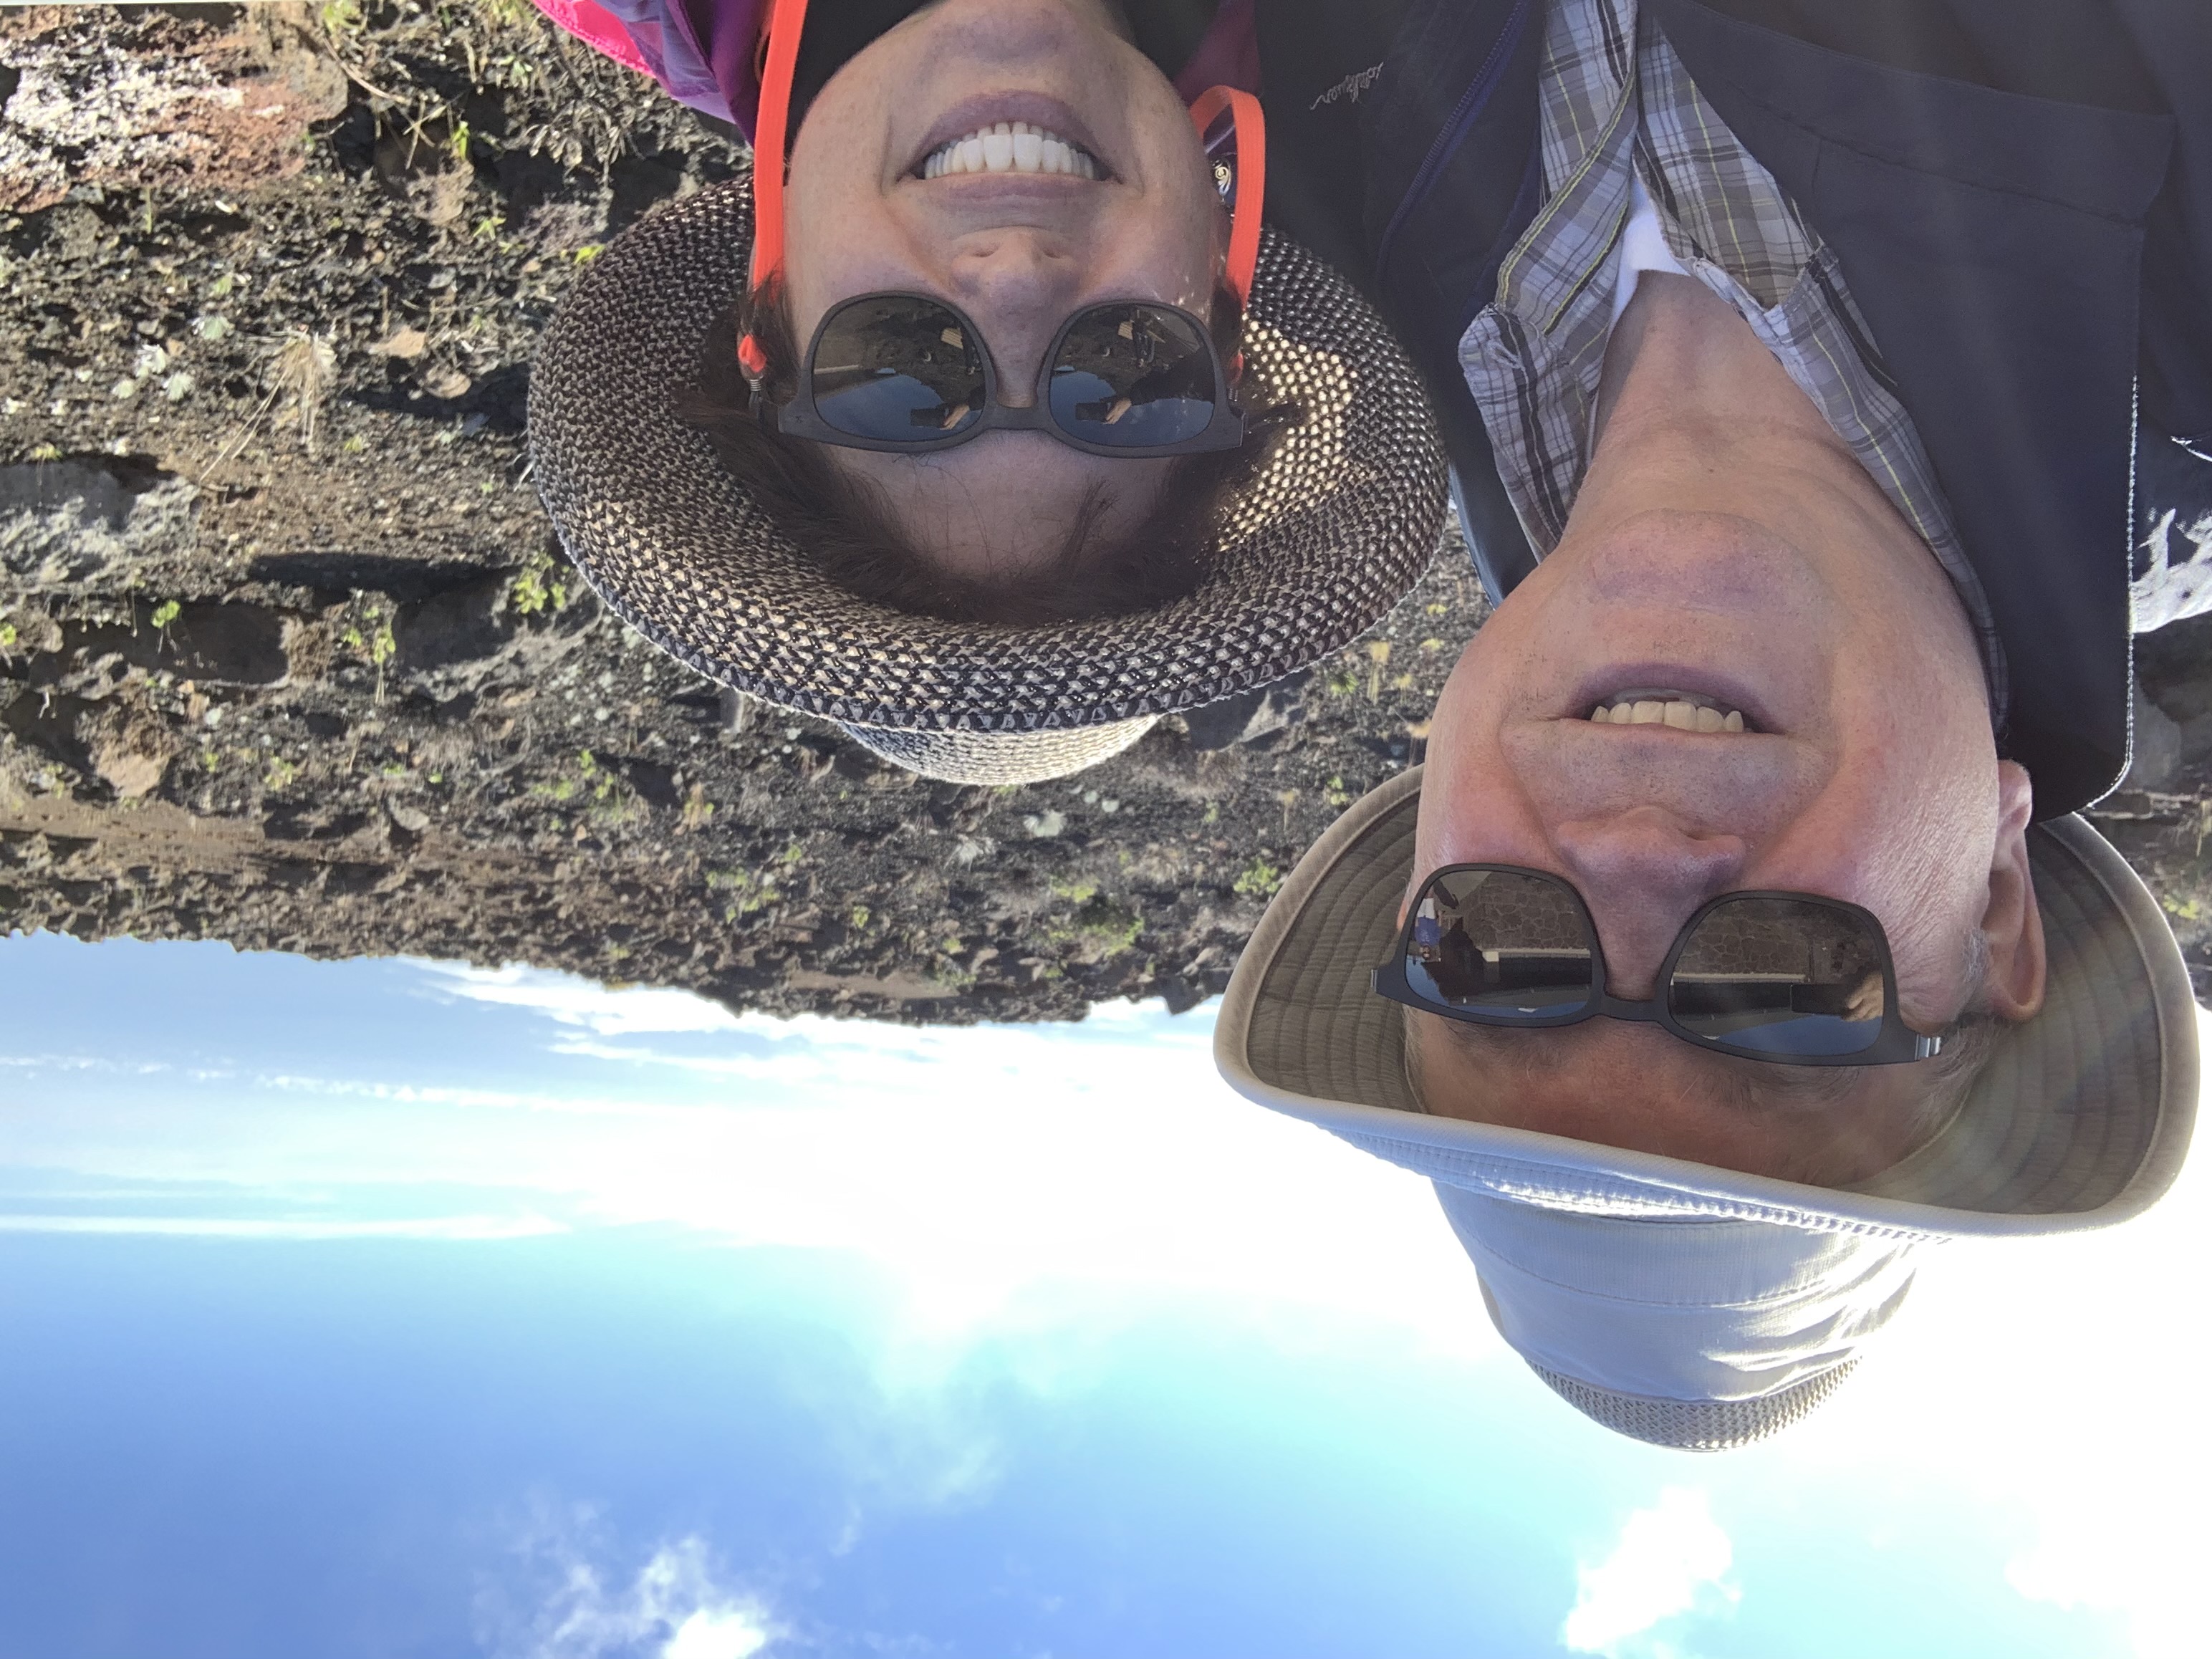 A selfie of two people with hats, hiking.